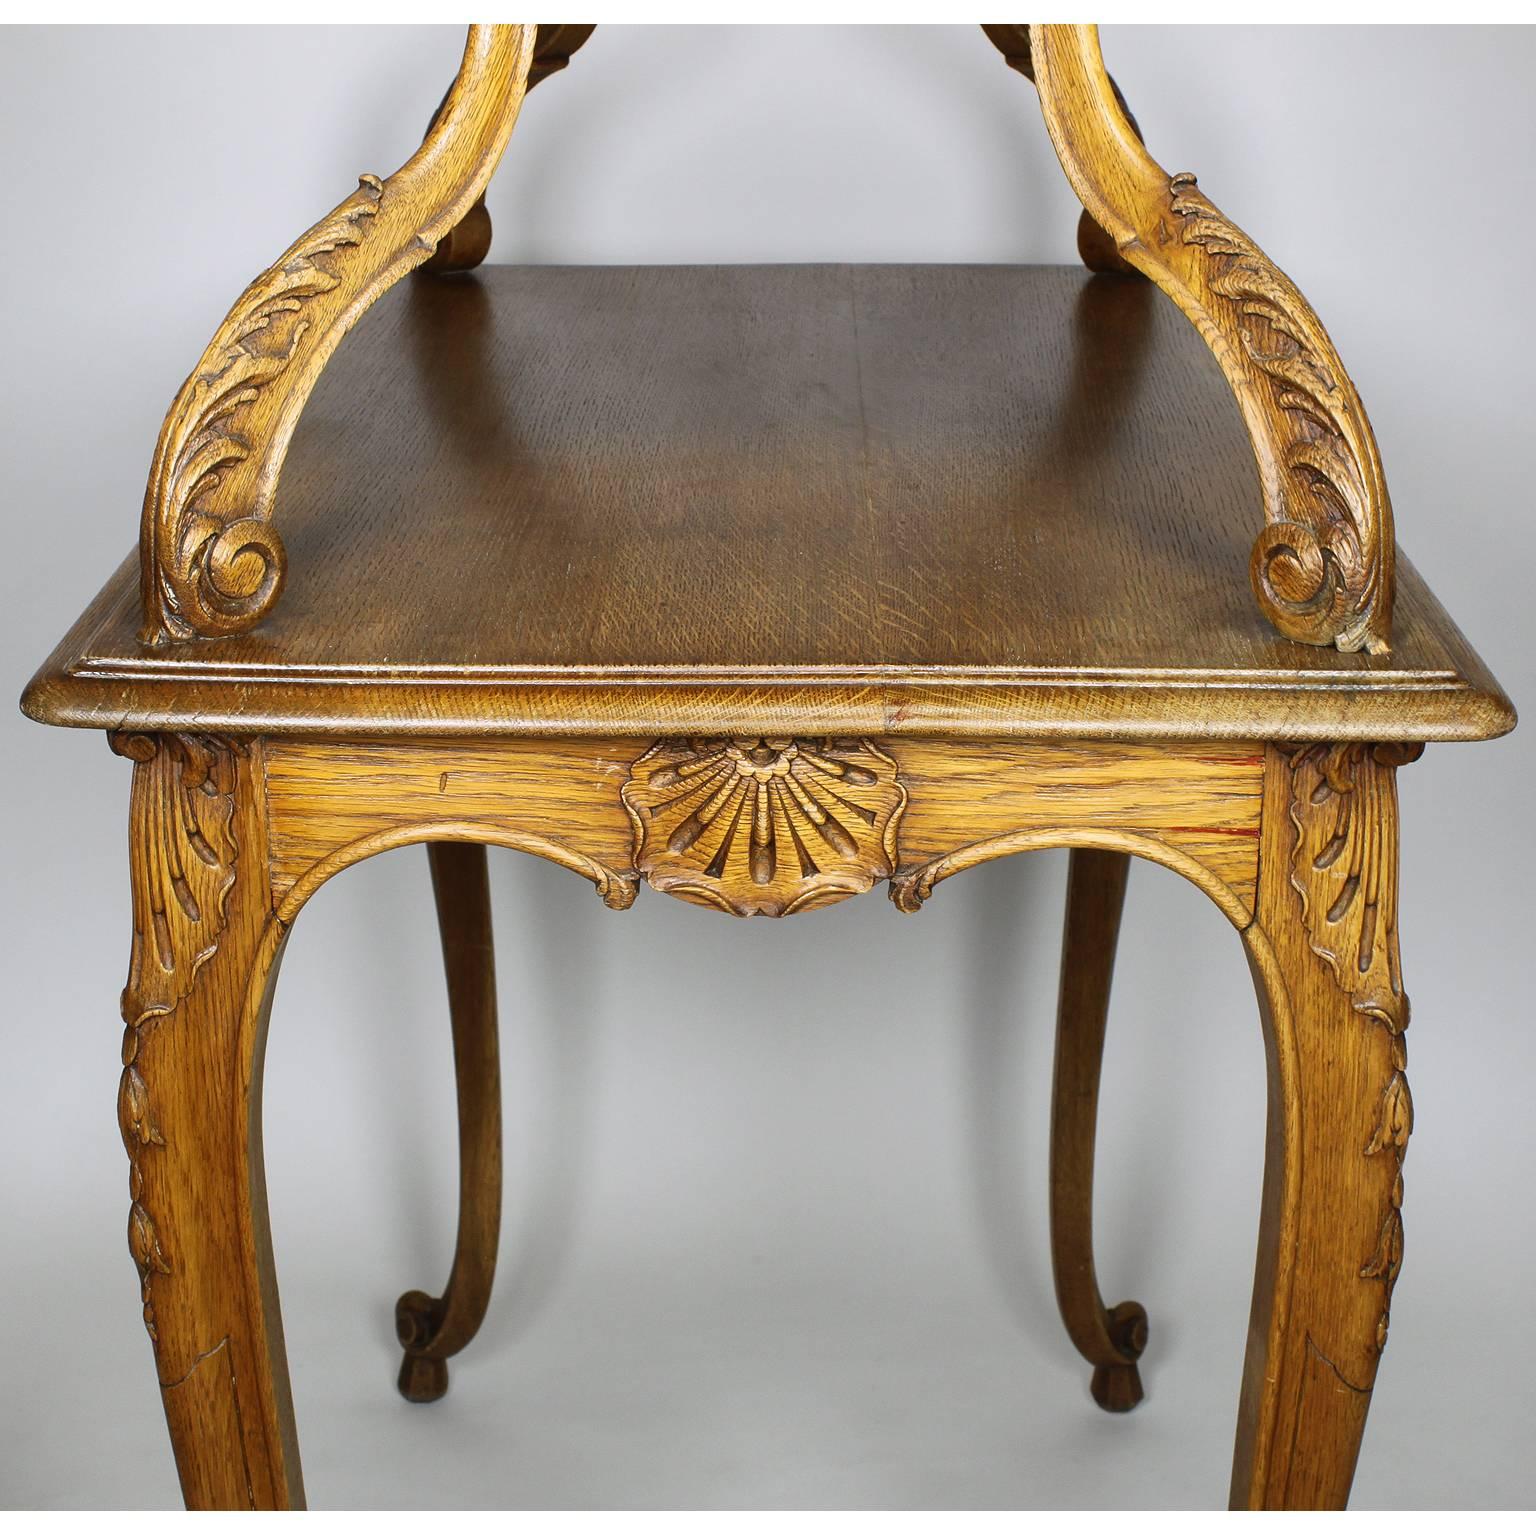 French 19th-20th Century Louis XV Style Carved Oak Two-Tier Tea or Dessert Table For Sale 2